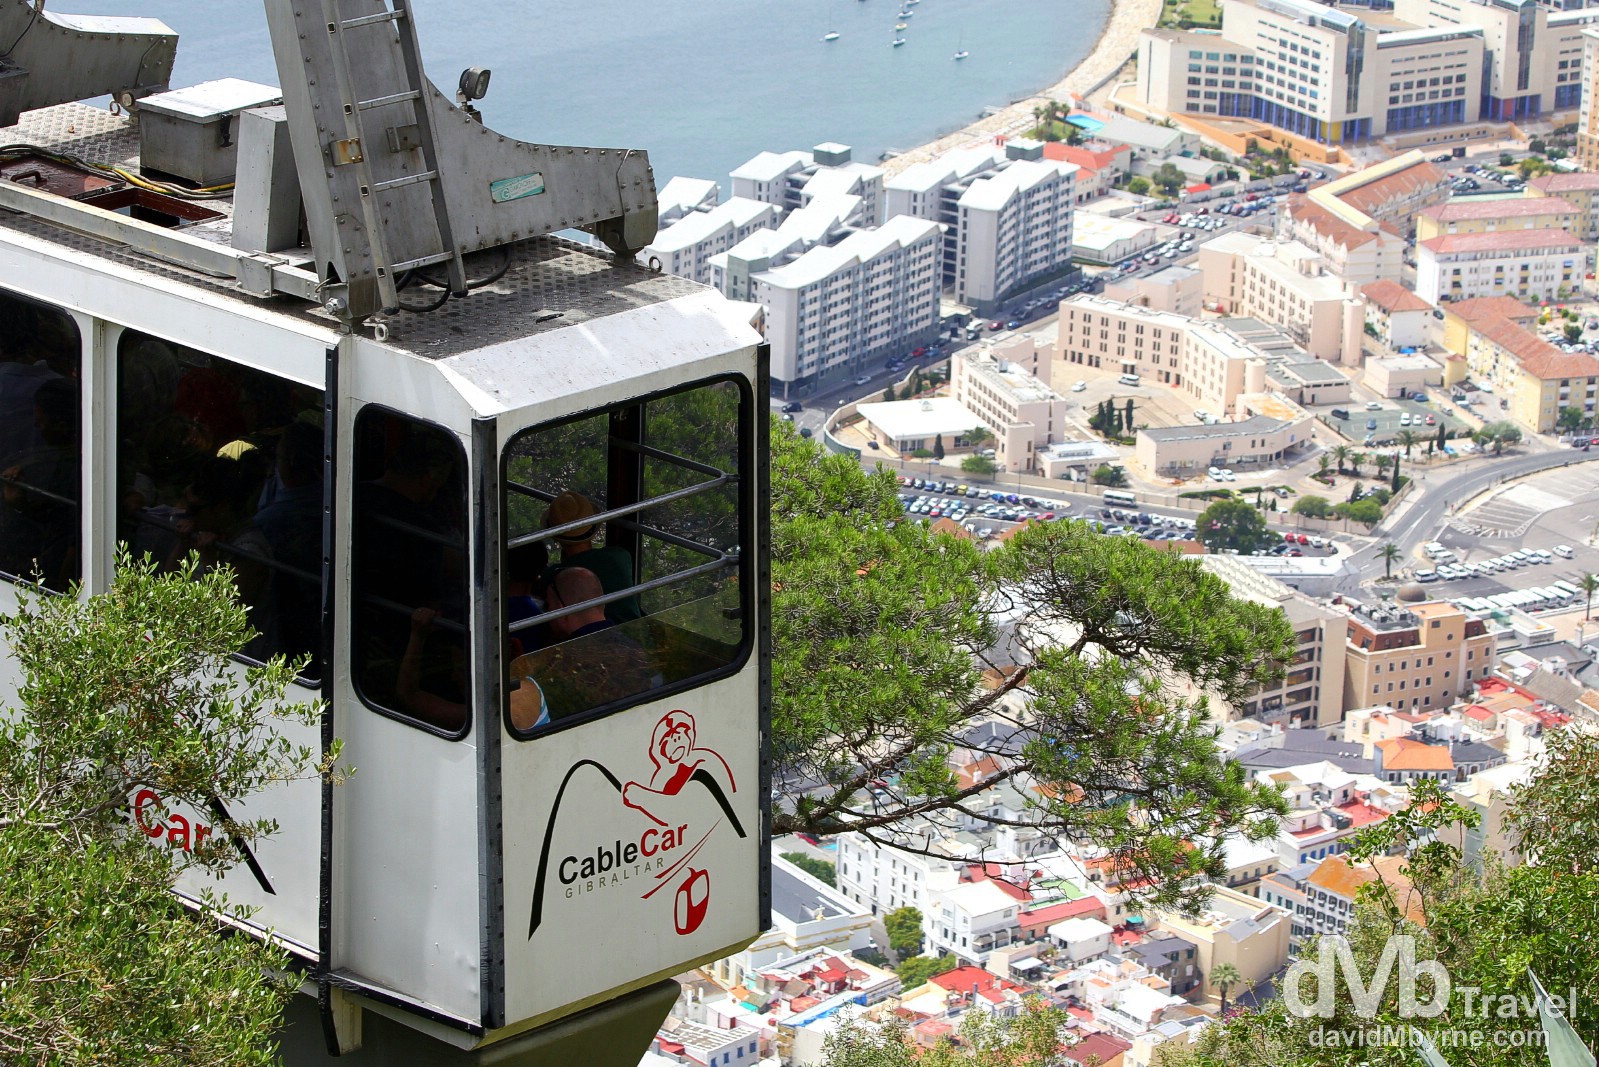 The Cable Car leaving the top station of The Upper Rock Nature Reserve in Gibraltar. June 5th, 2014.